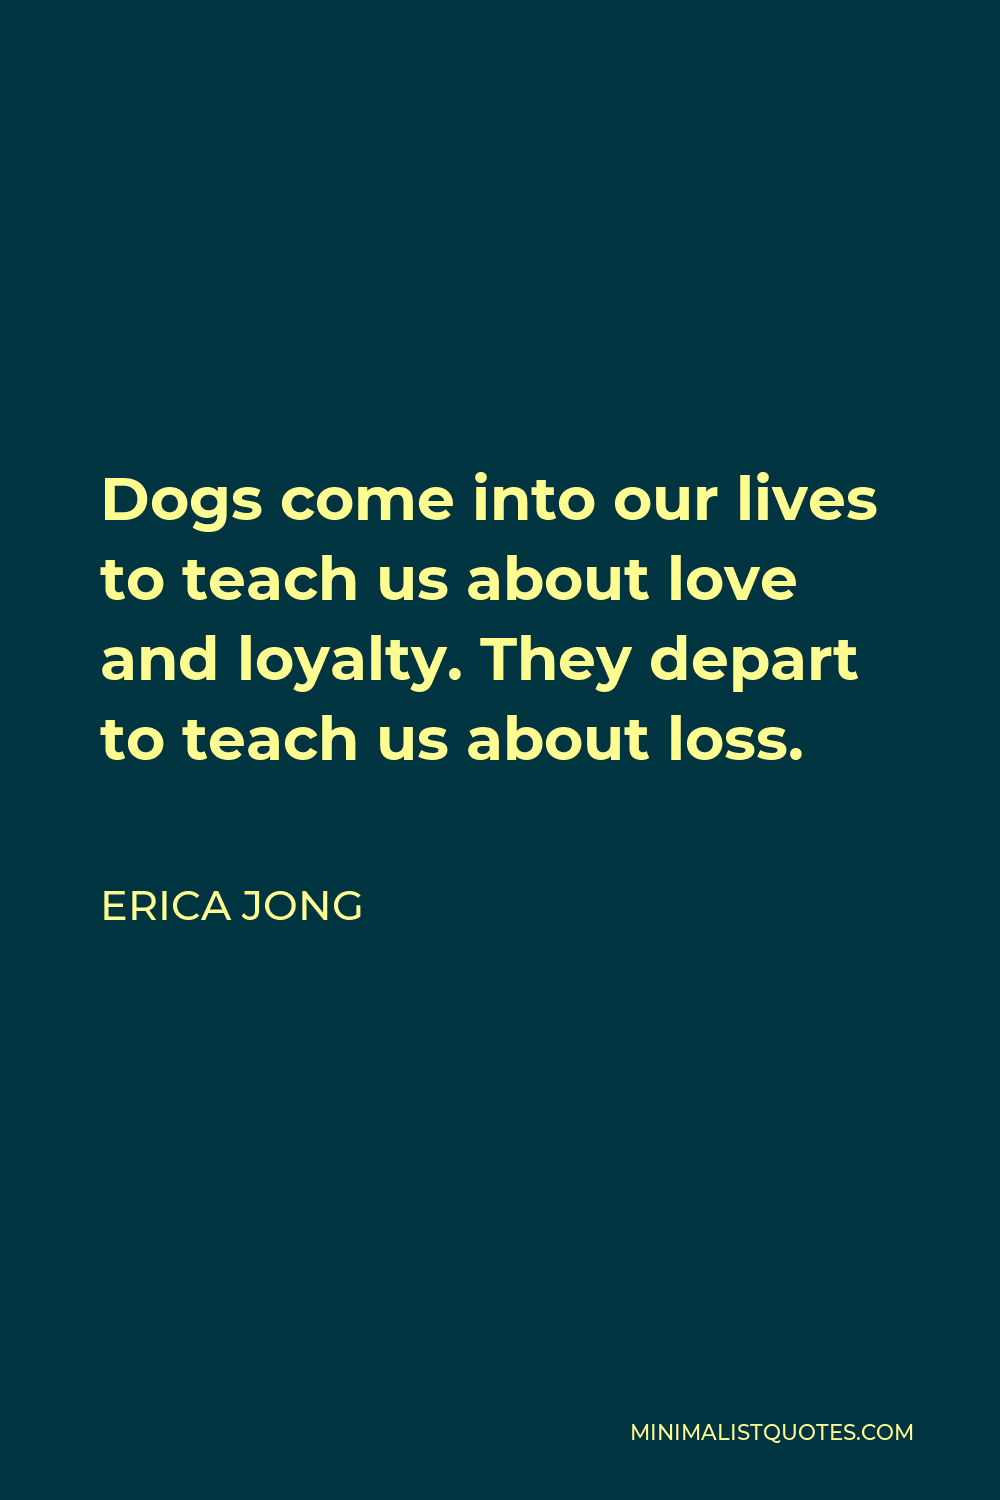 Erica Jong Quote - Dogs come into our lives to teach us about love and loyalty. They depart to teach us about loss.